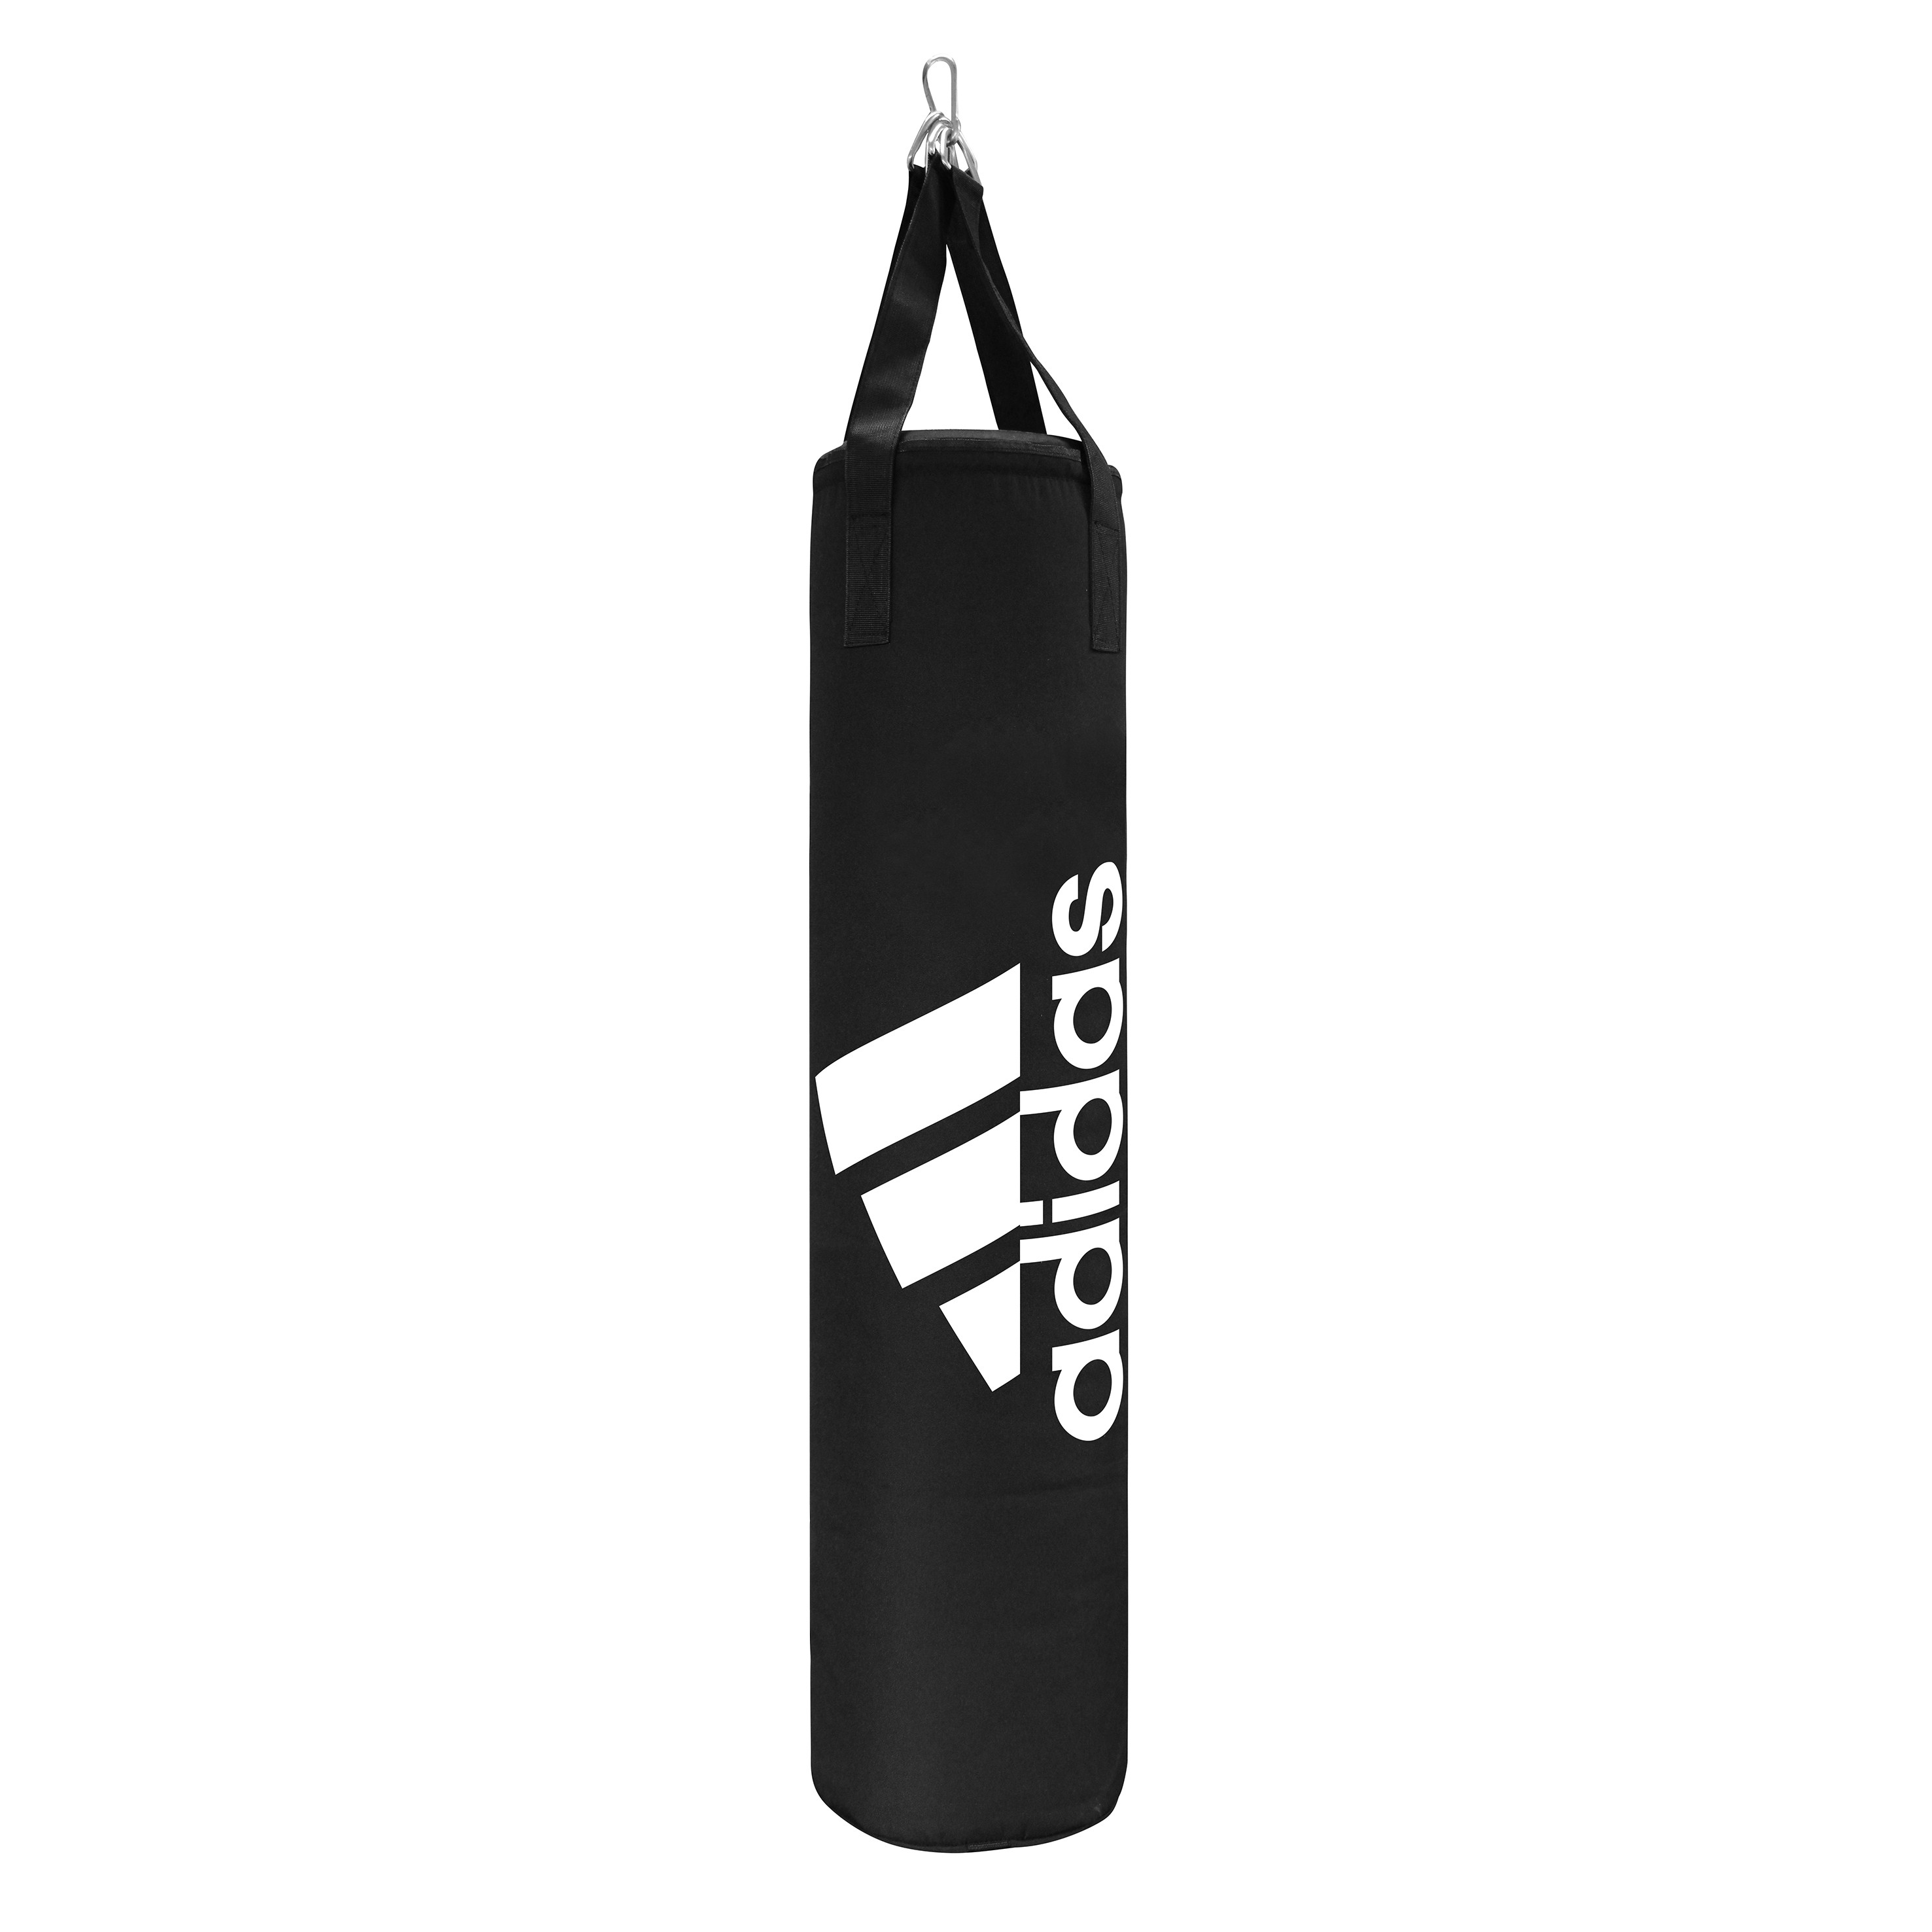 adidas Home Use Heavy Bag, for Boxing, MMA, Kick Boxing Training, Fitness and Cardio Workout – Filled